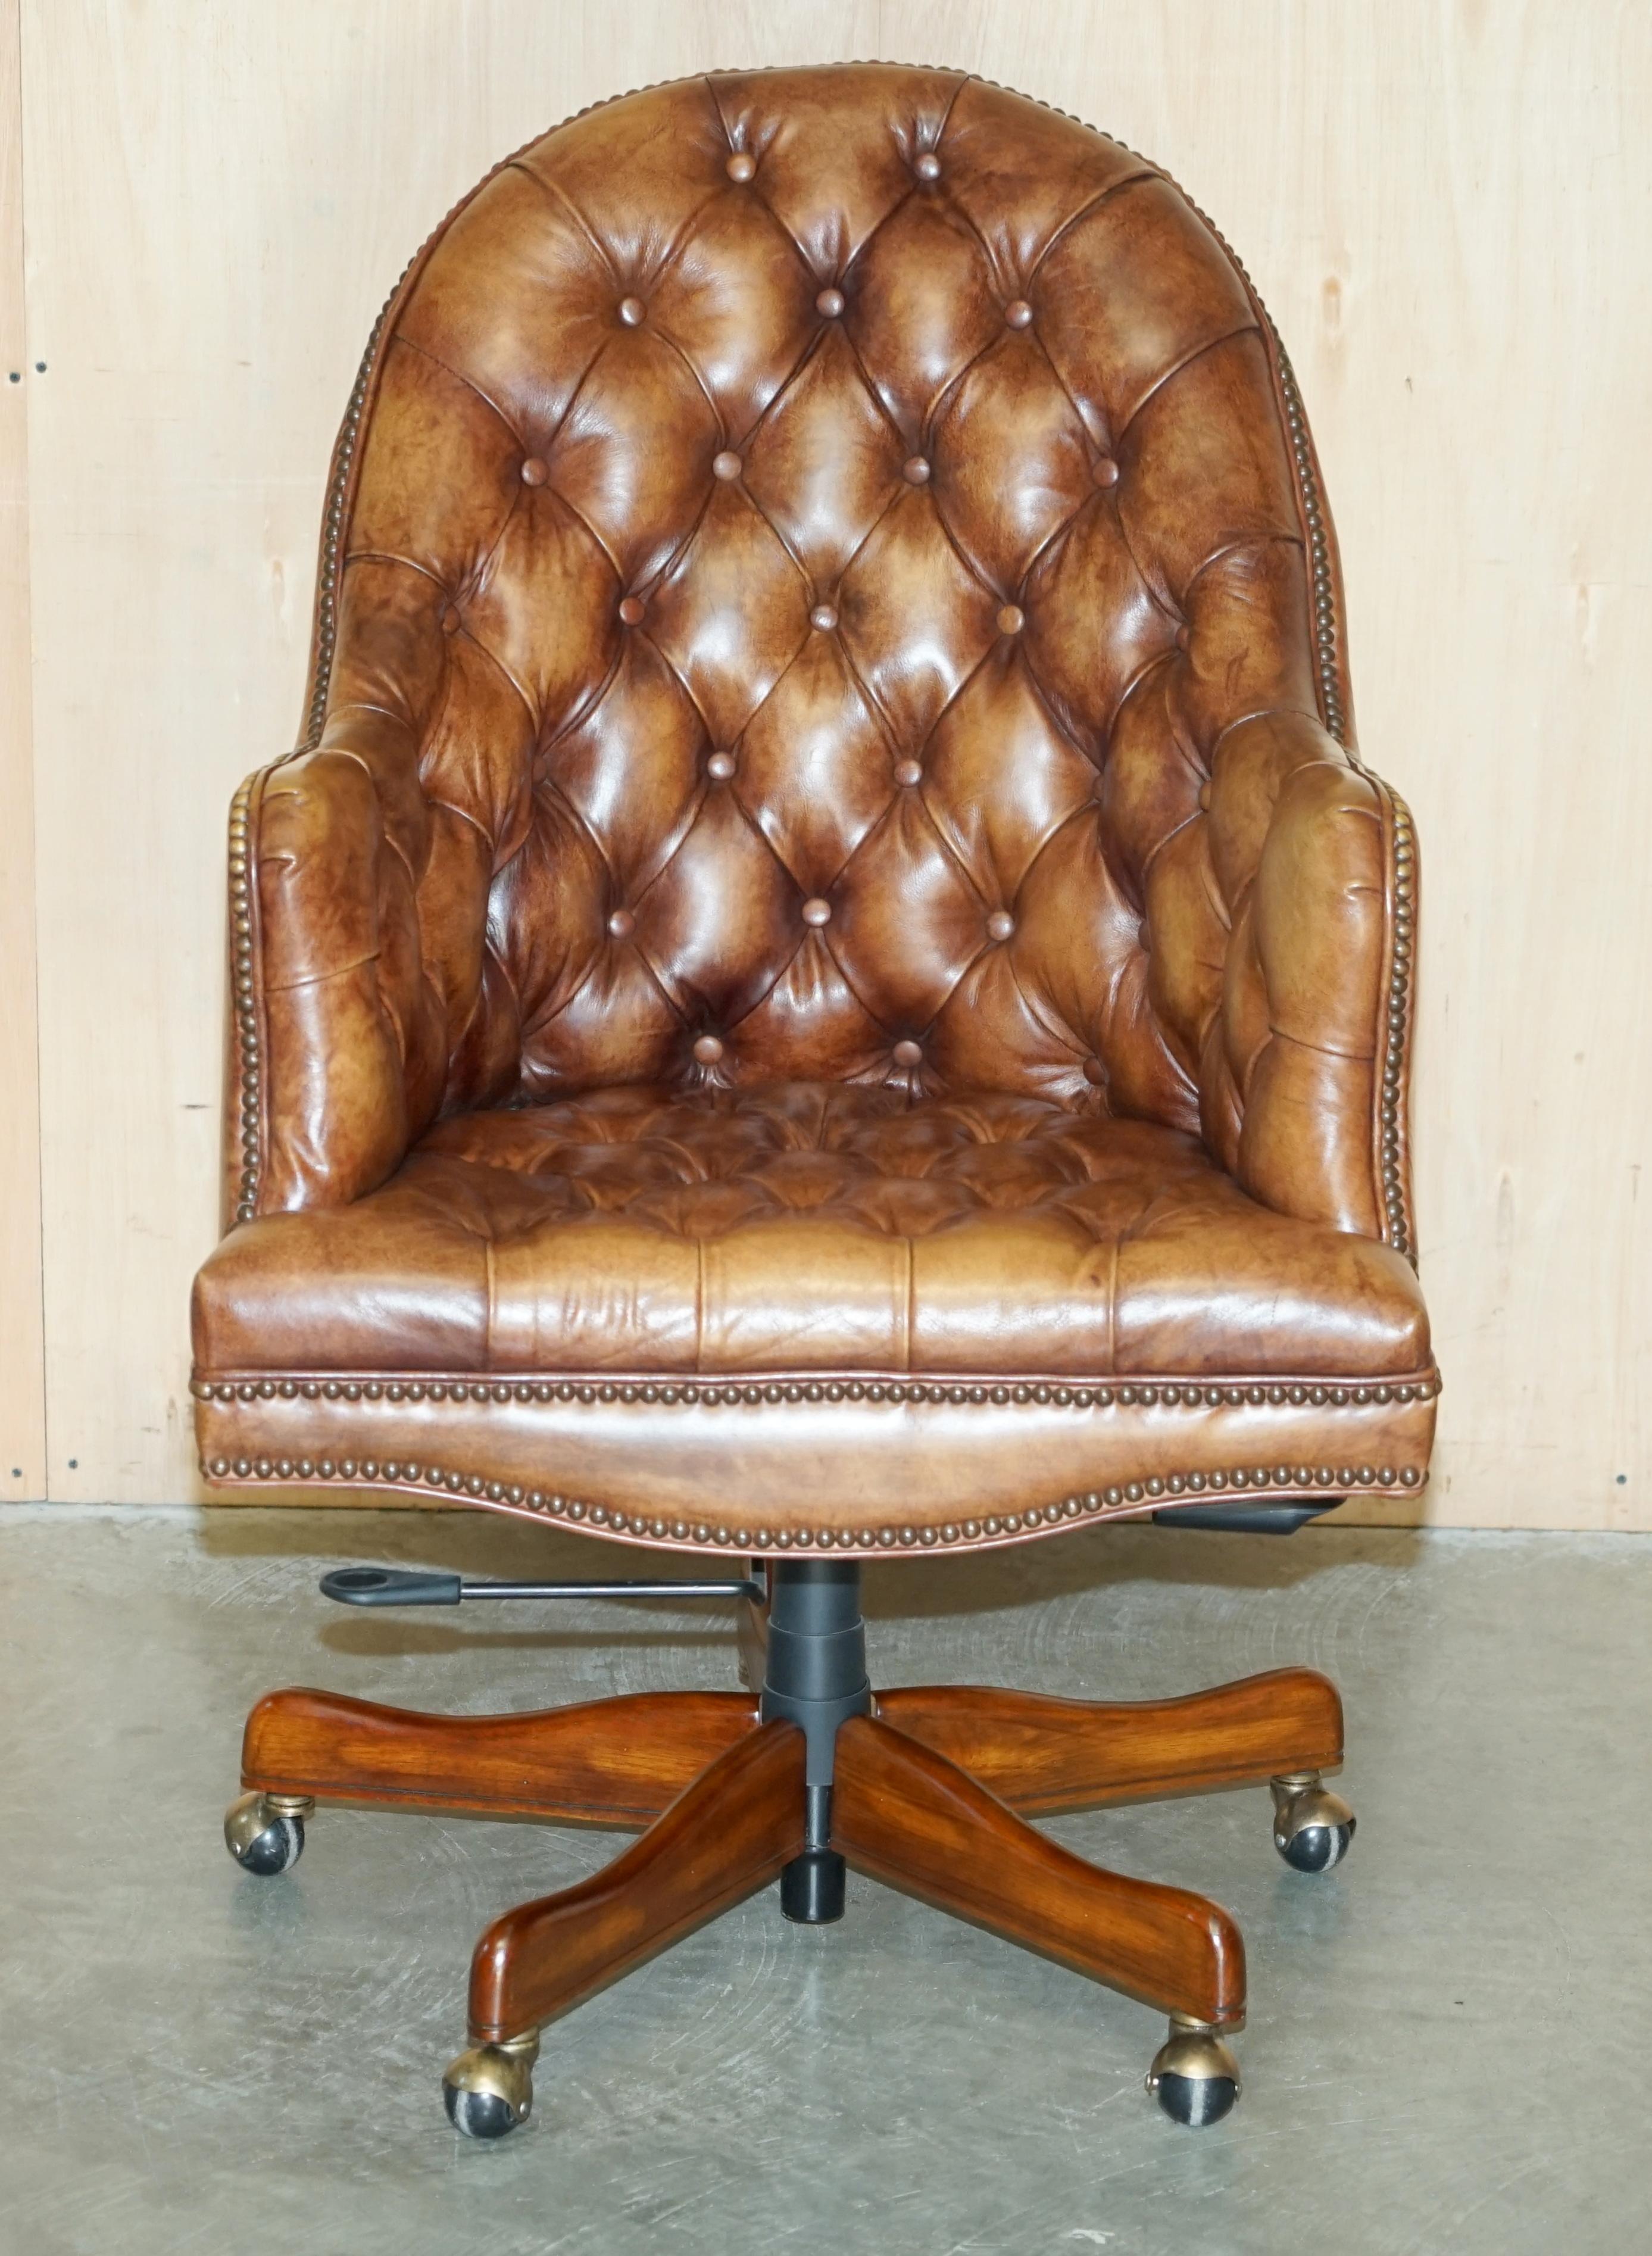 Royal House Antiques

Royal House Antiques is delighted to offer for sale this stunning hand made in England, aged brown hand dyed leather Chesterfield captains office chair 

Please note the delivery fee listed is just a guide, it covers within the